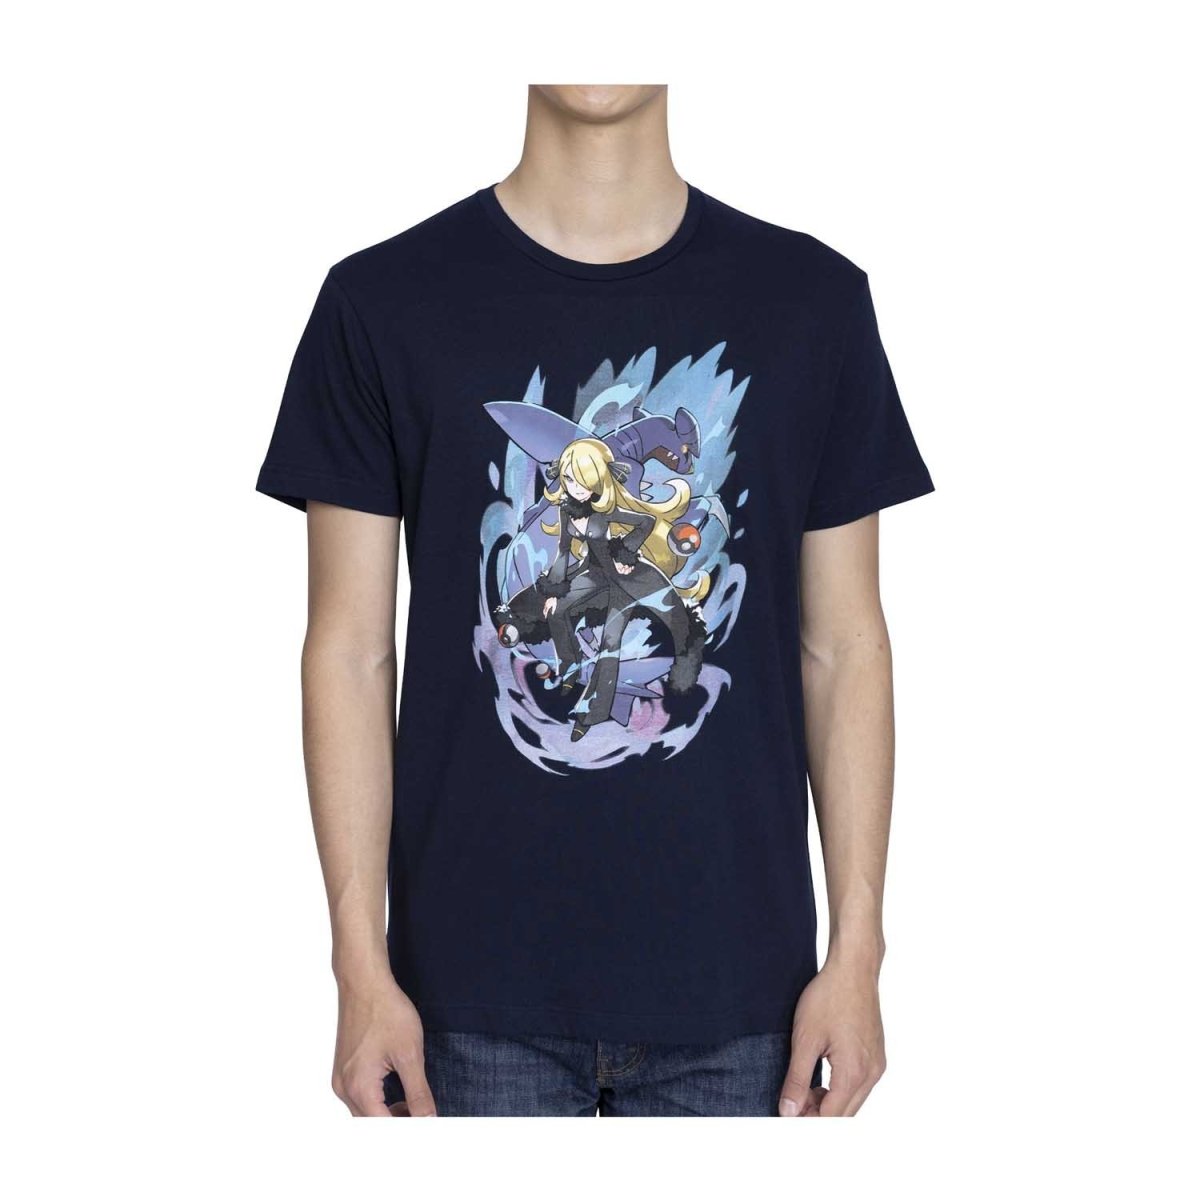 Cynthia Pokémon Trainers Navy Relaxed Fit Crew Neck T-Shirt - Adult ...